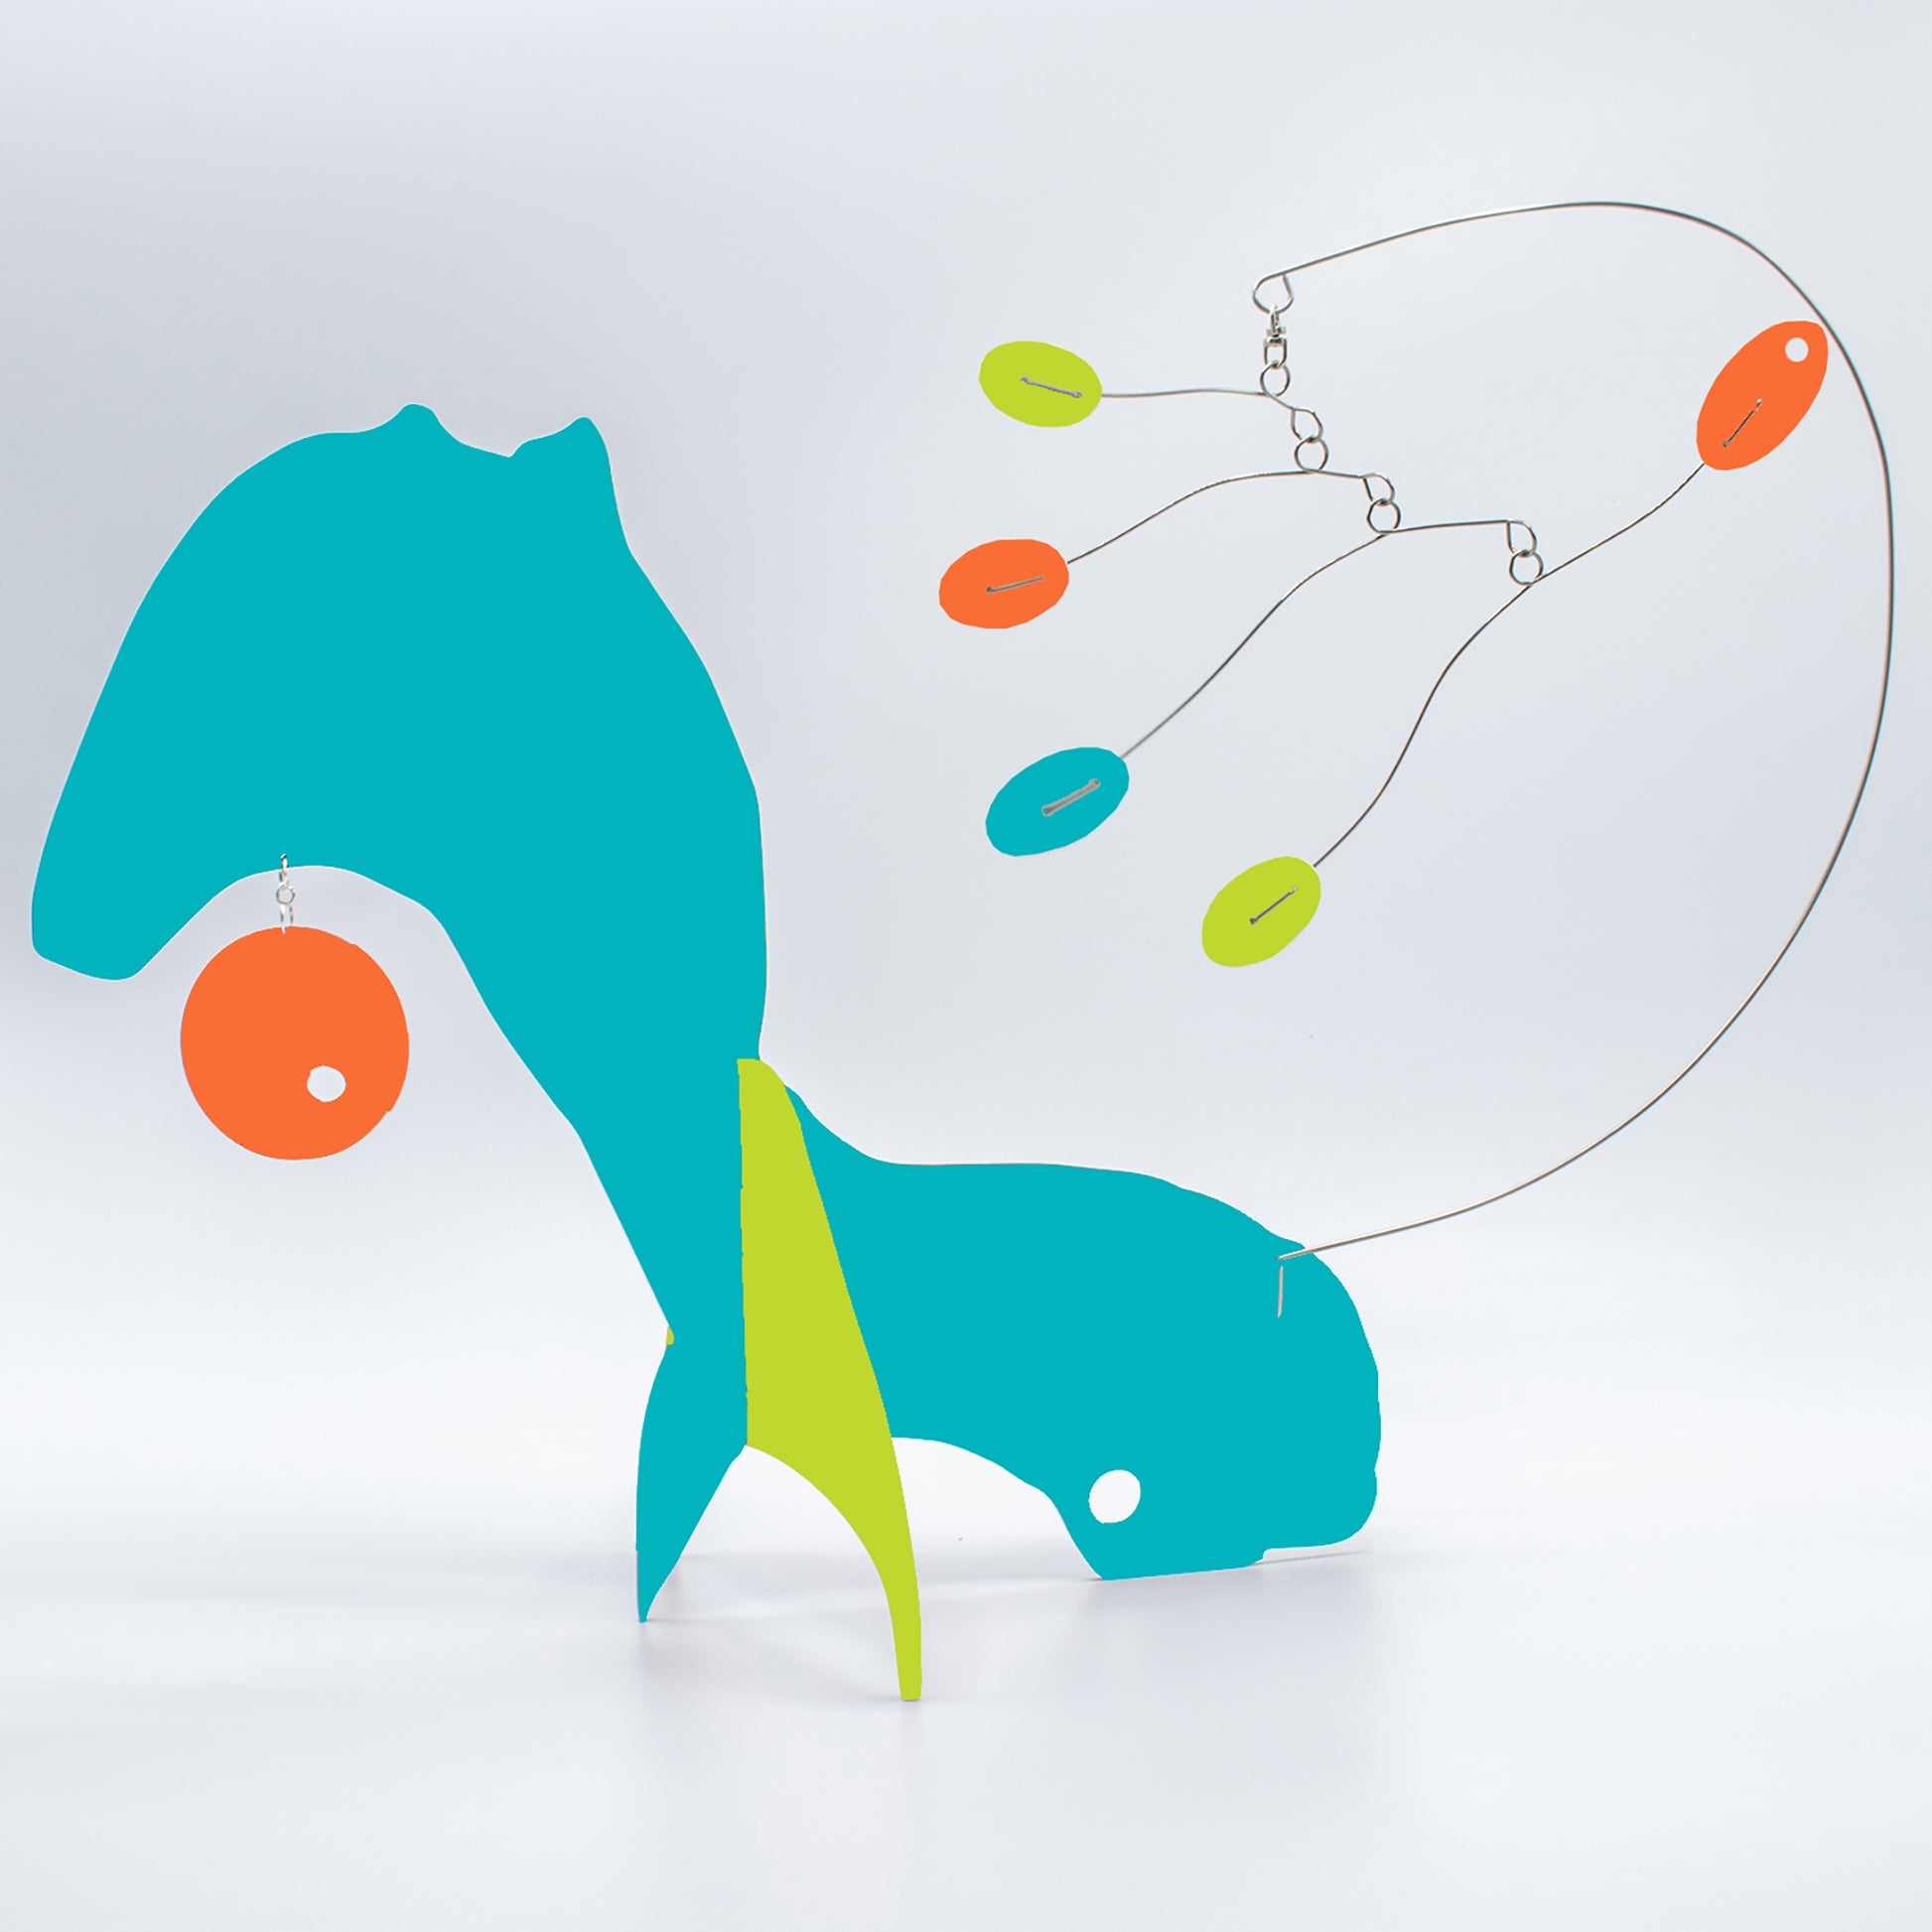 KinetiCats Collection Fox in Aqua, Orange, and Lime Green - one of 12 Modern Cute Abstract Animal Art Sculpture Kinetic Stabiles inspired by Dada and mid century modern style art by AtomicMobiles.com